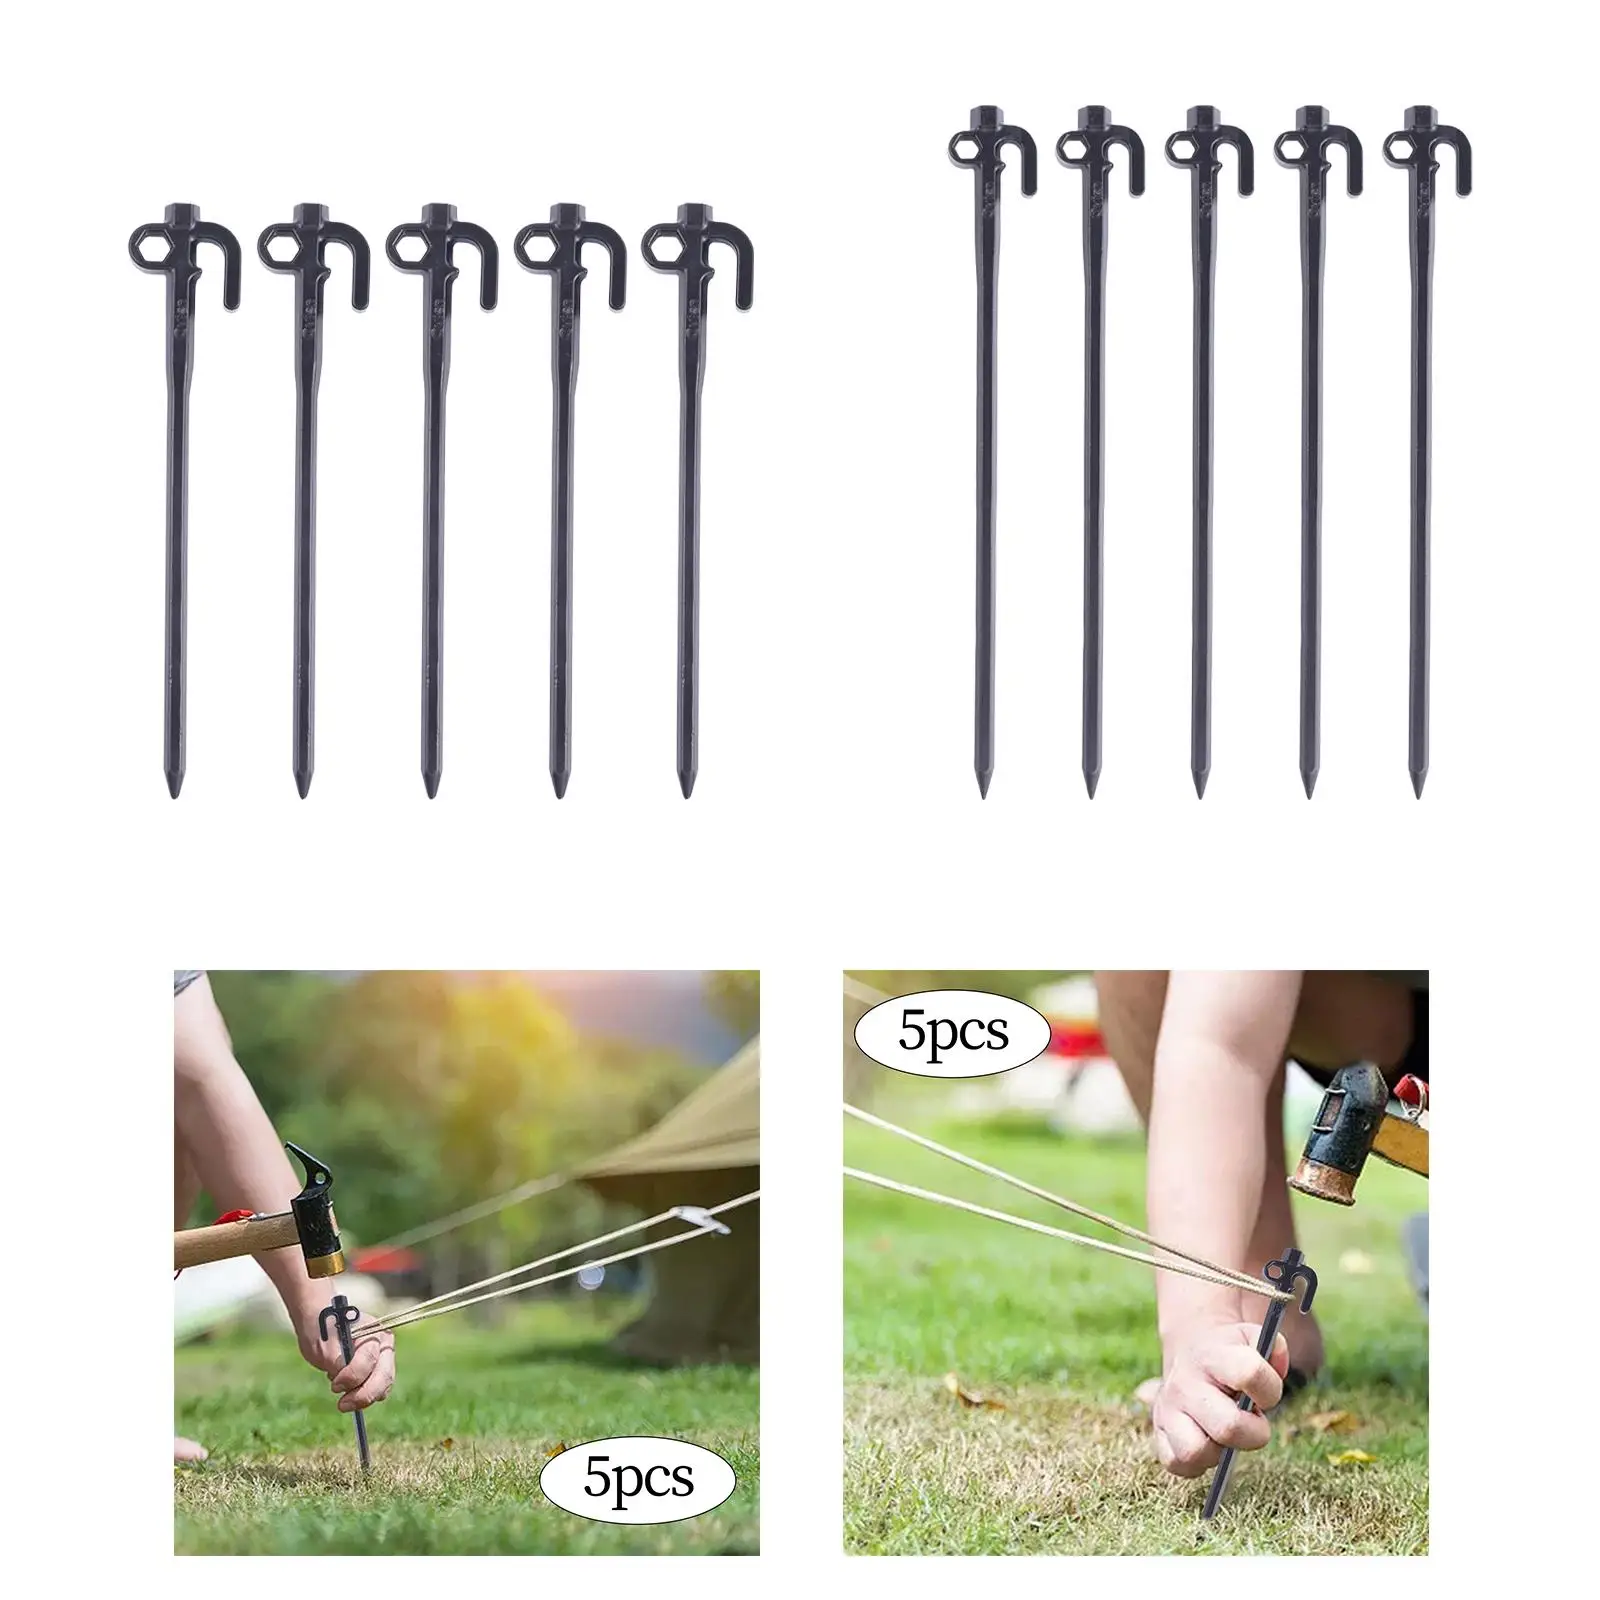 5 Pieces Camping Tent Nails Sand Anchor Nail for Car Snowfield Grassland